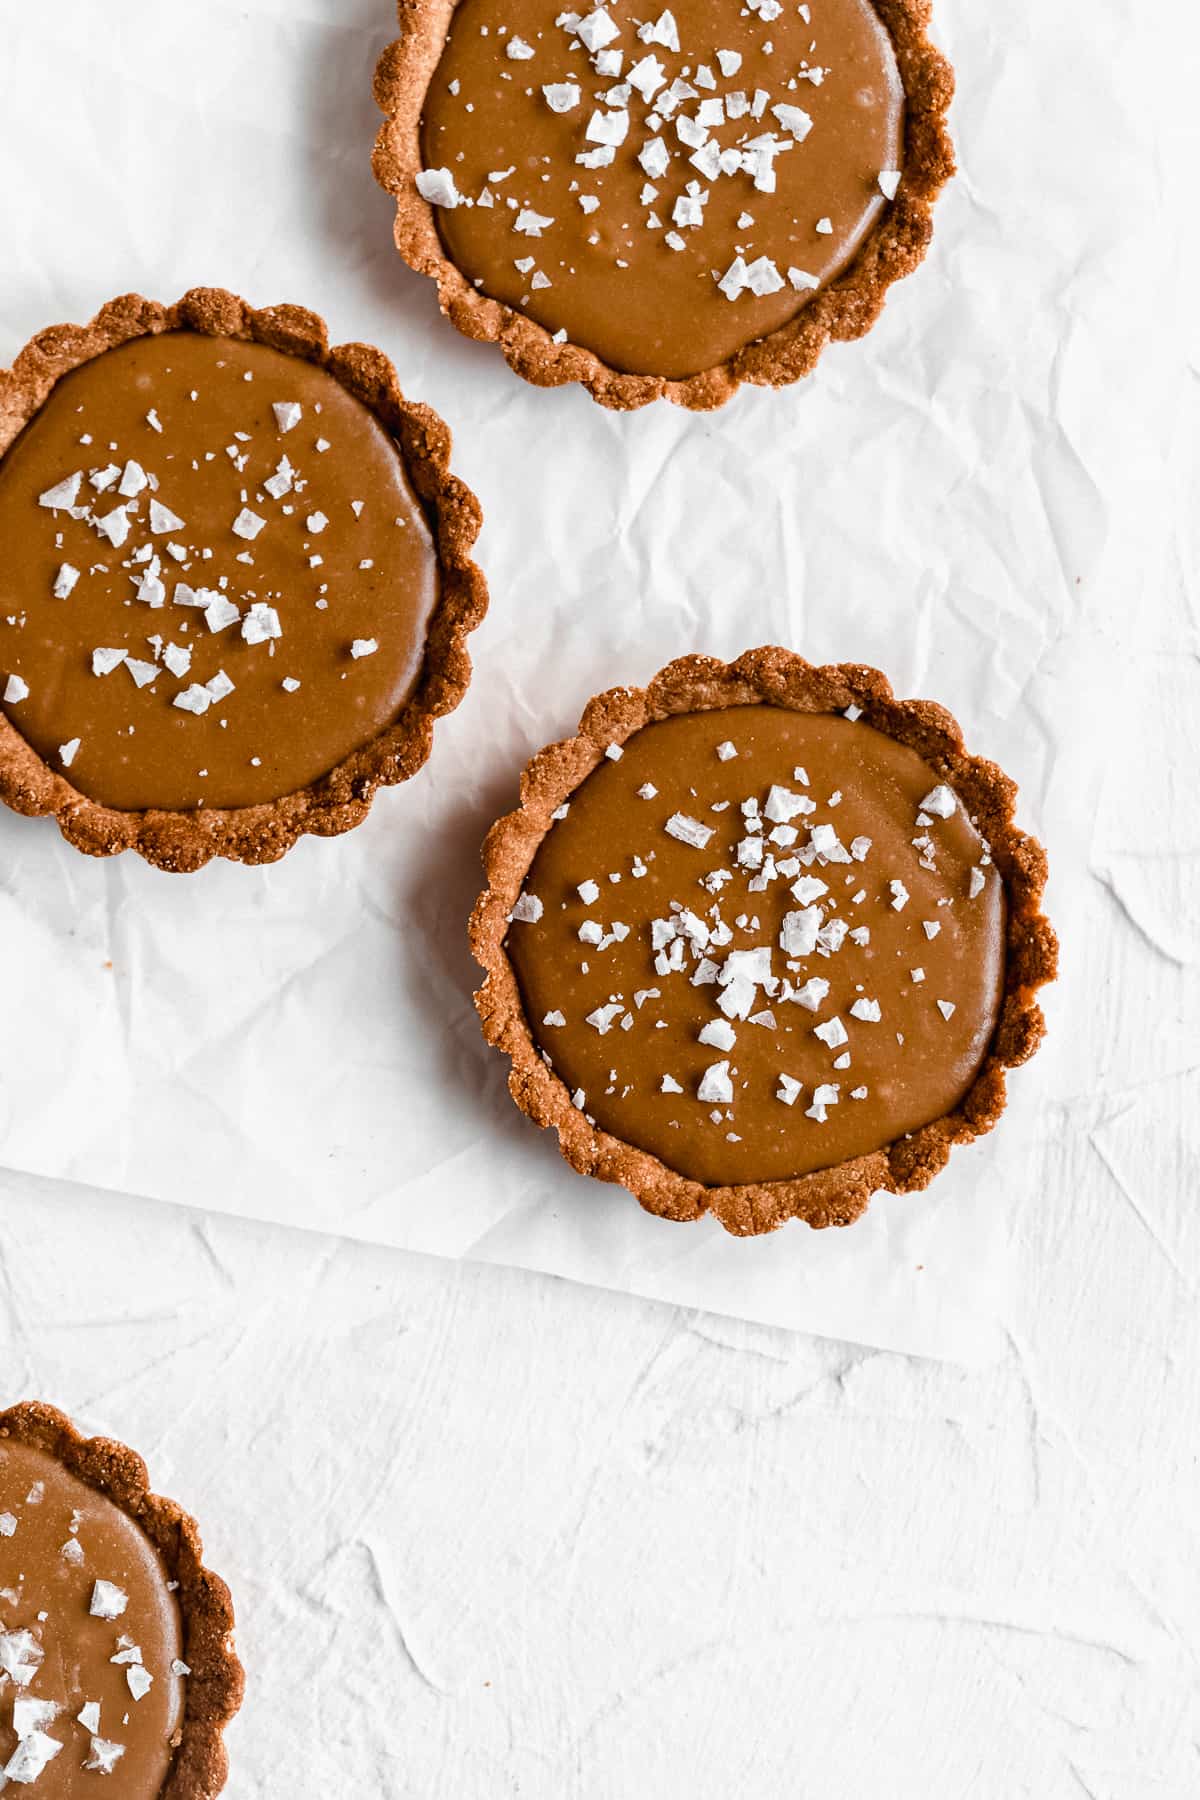 Overhead photo of three Vegan Salted Caramel Tarts arranged on white parchment paper.  